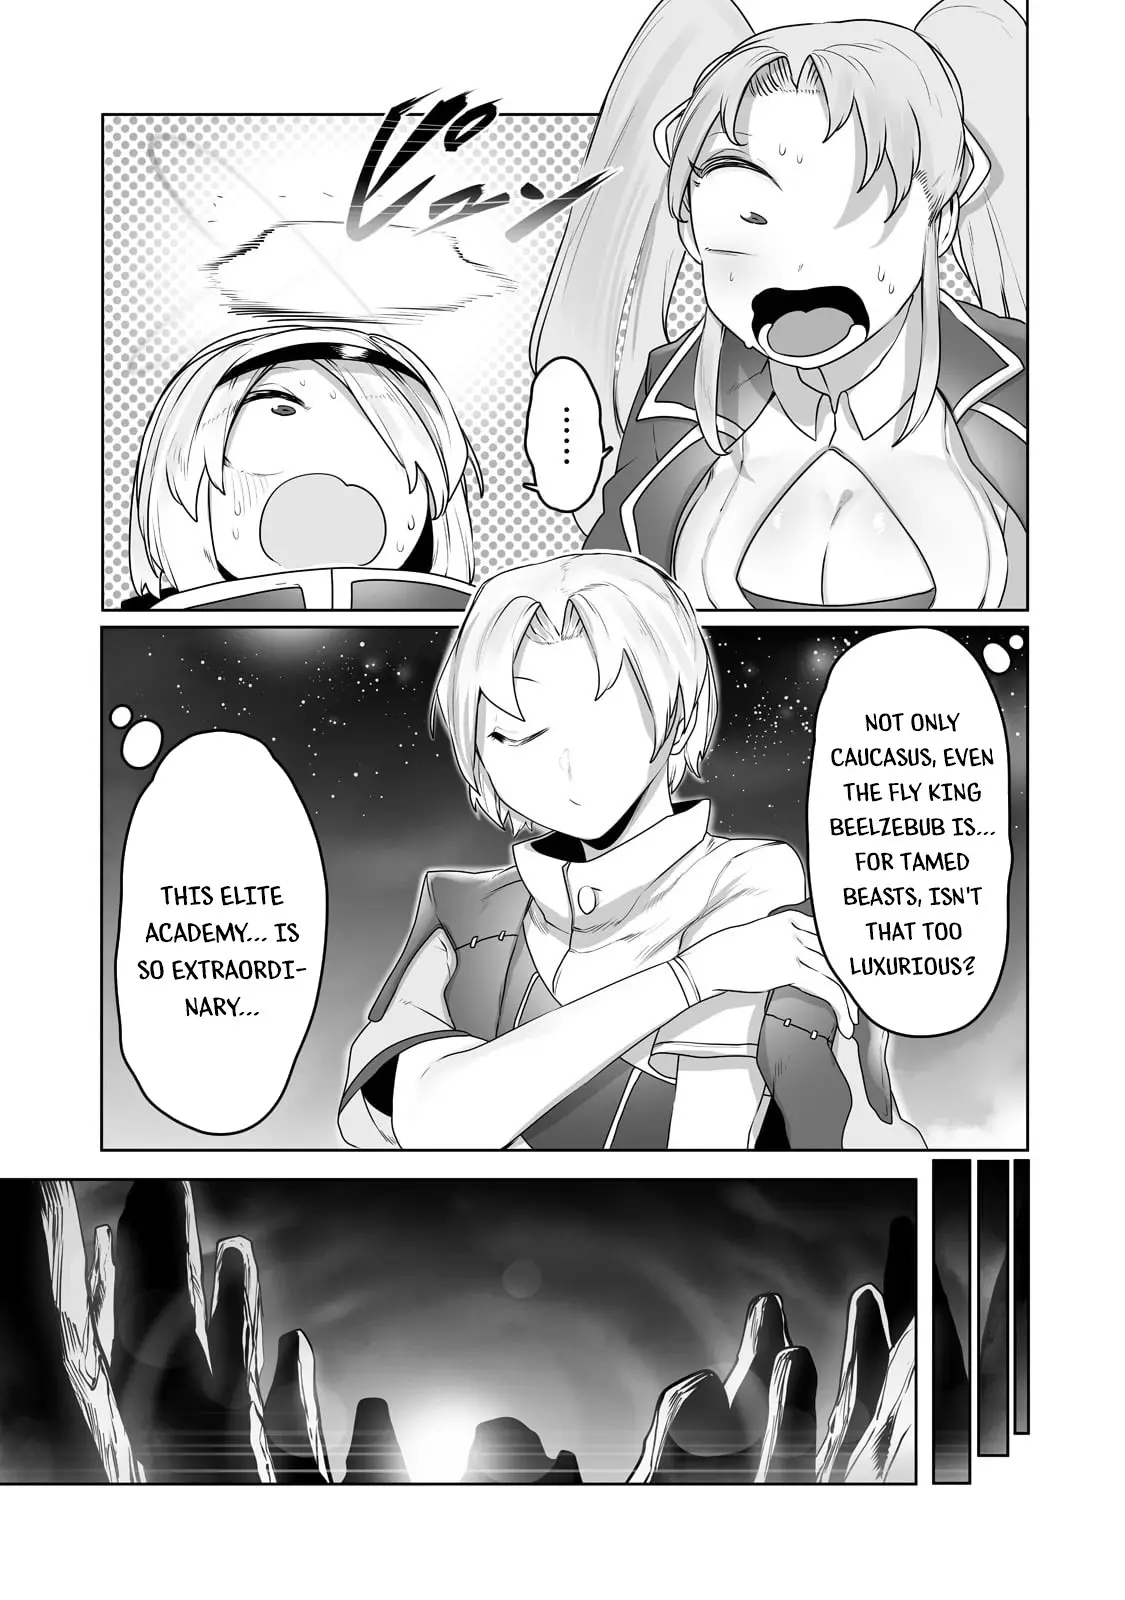 The Useless Tamer Will Turn Into The Top Unconsciously By My Previous Life Knowledge - 16 page 6-2e2f9bb3